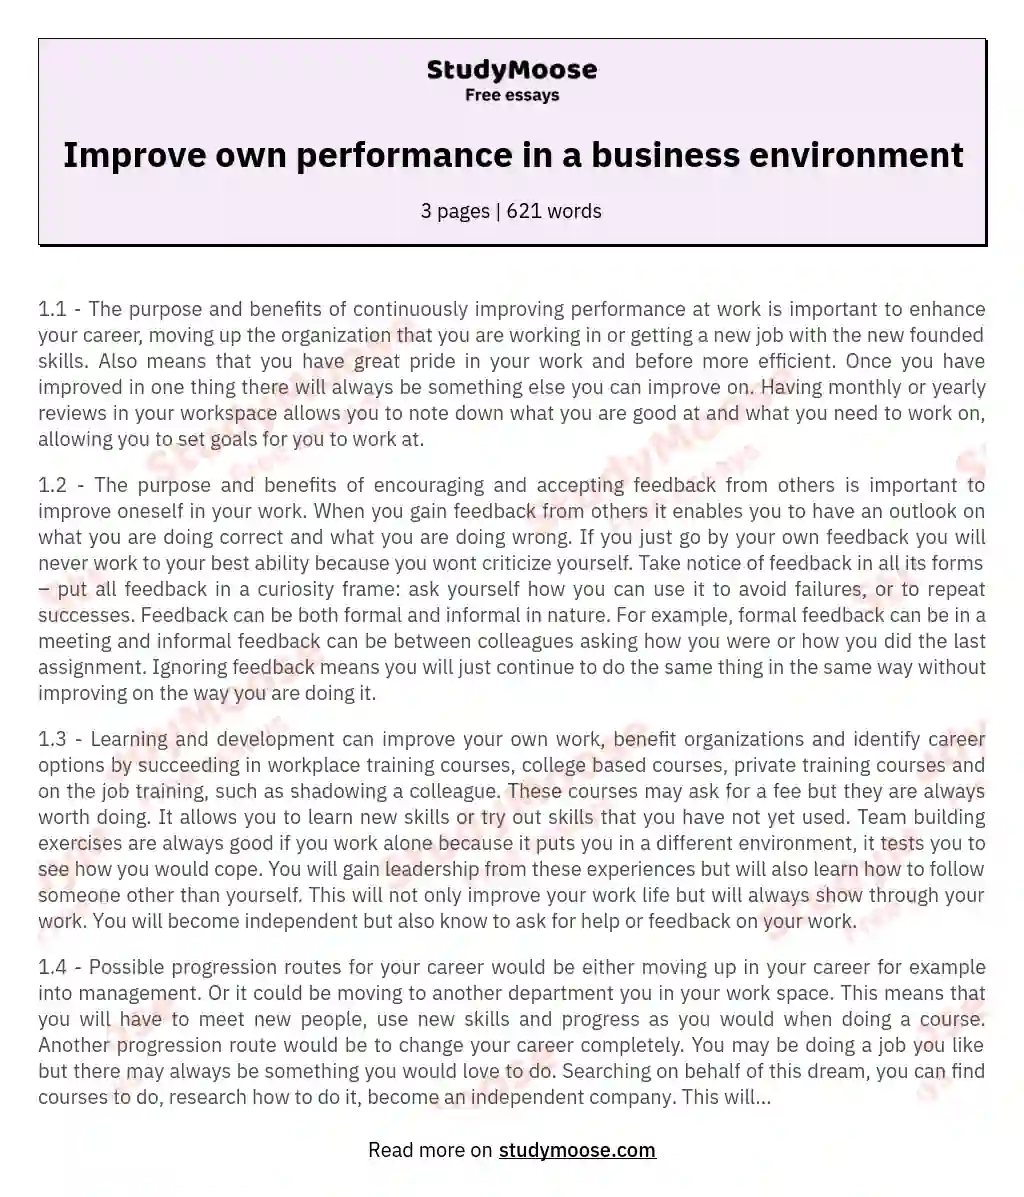 Improve own performance in a business environment essay